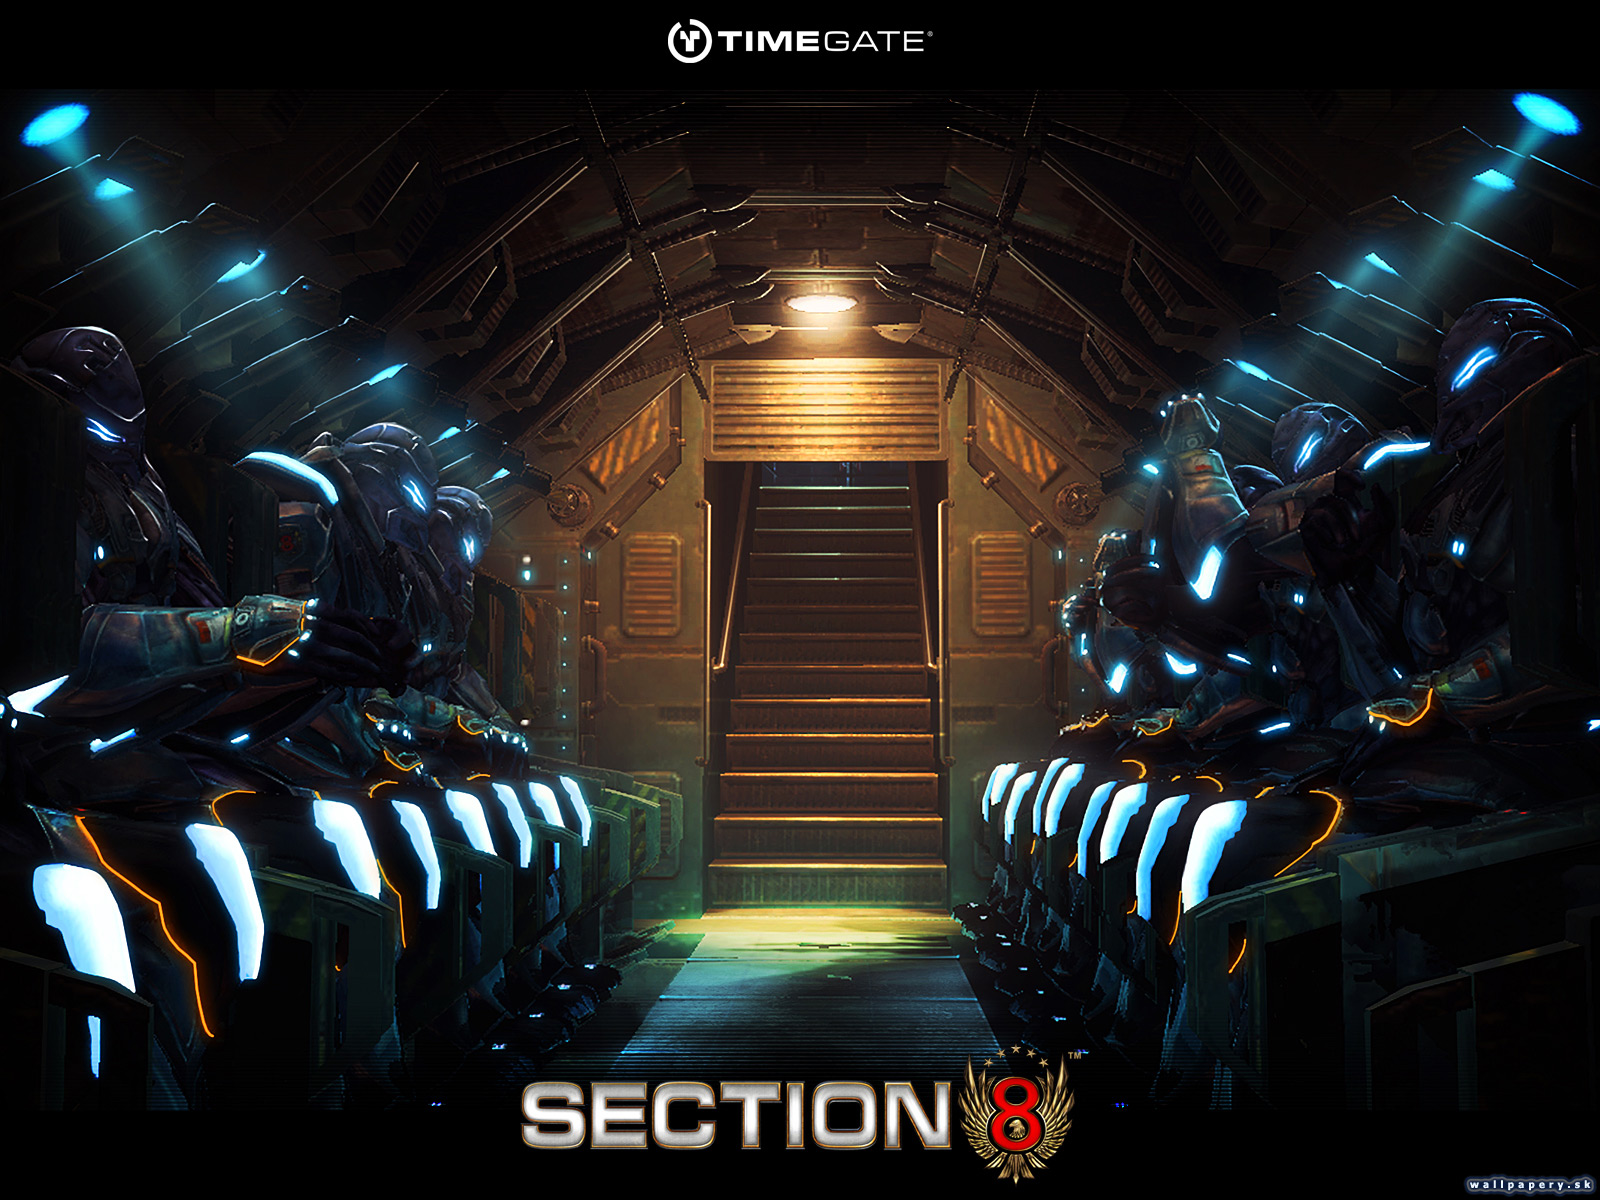 Section 8 - wallpaper 8